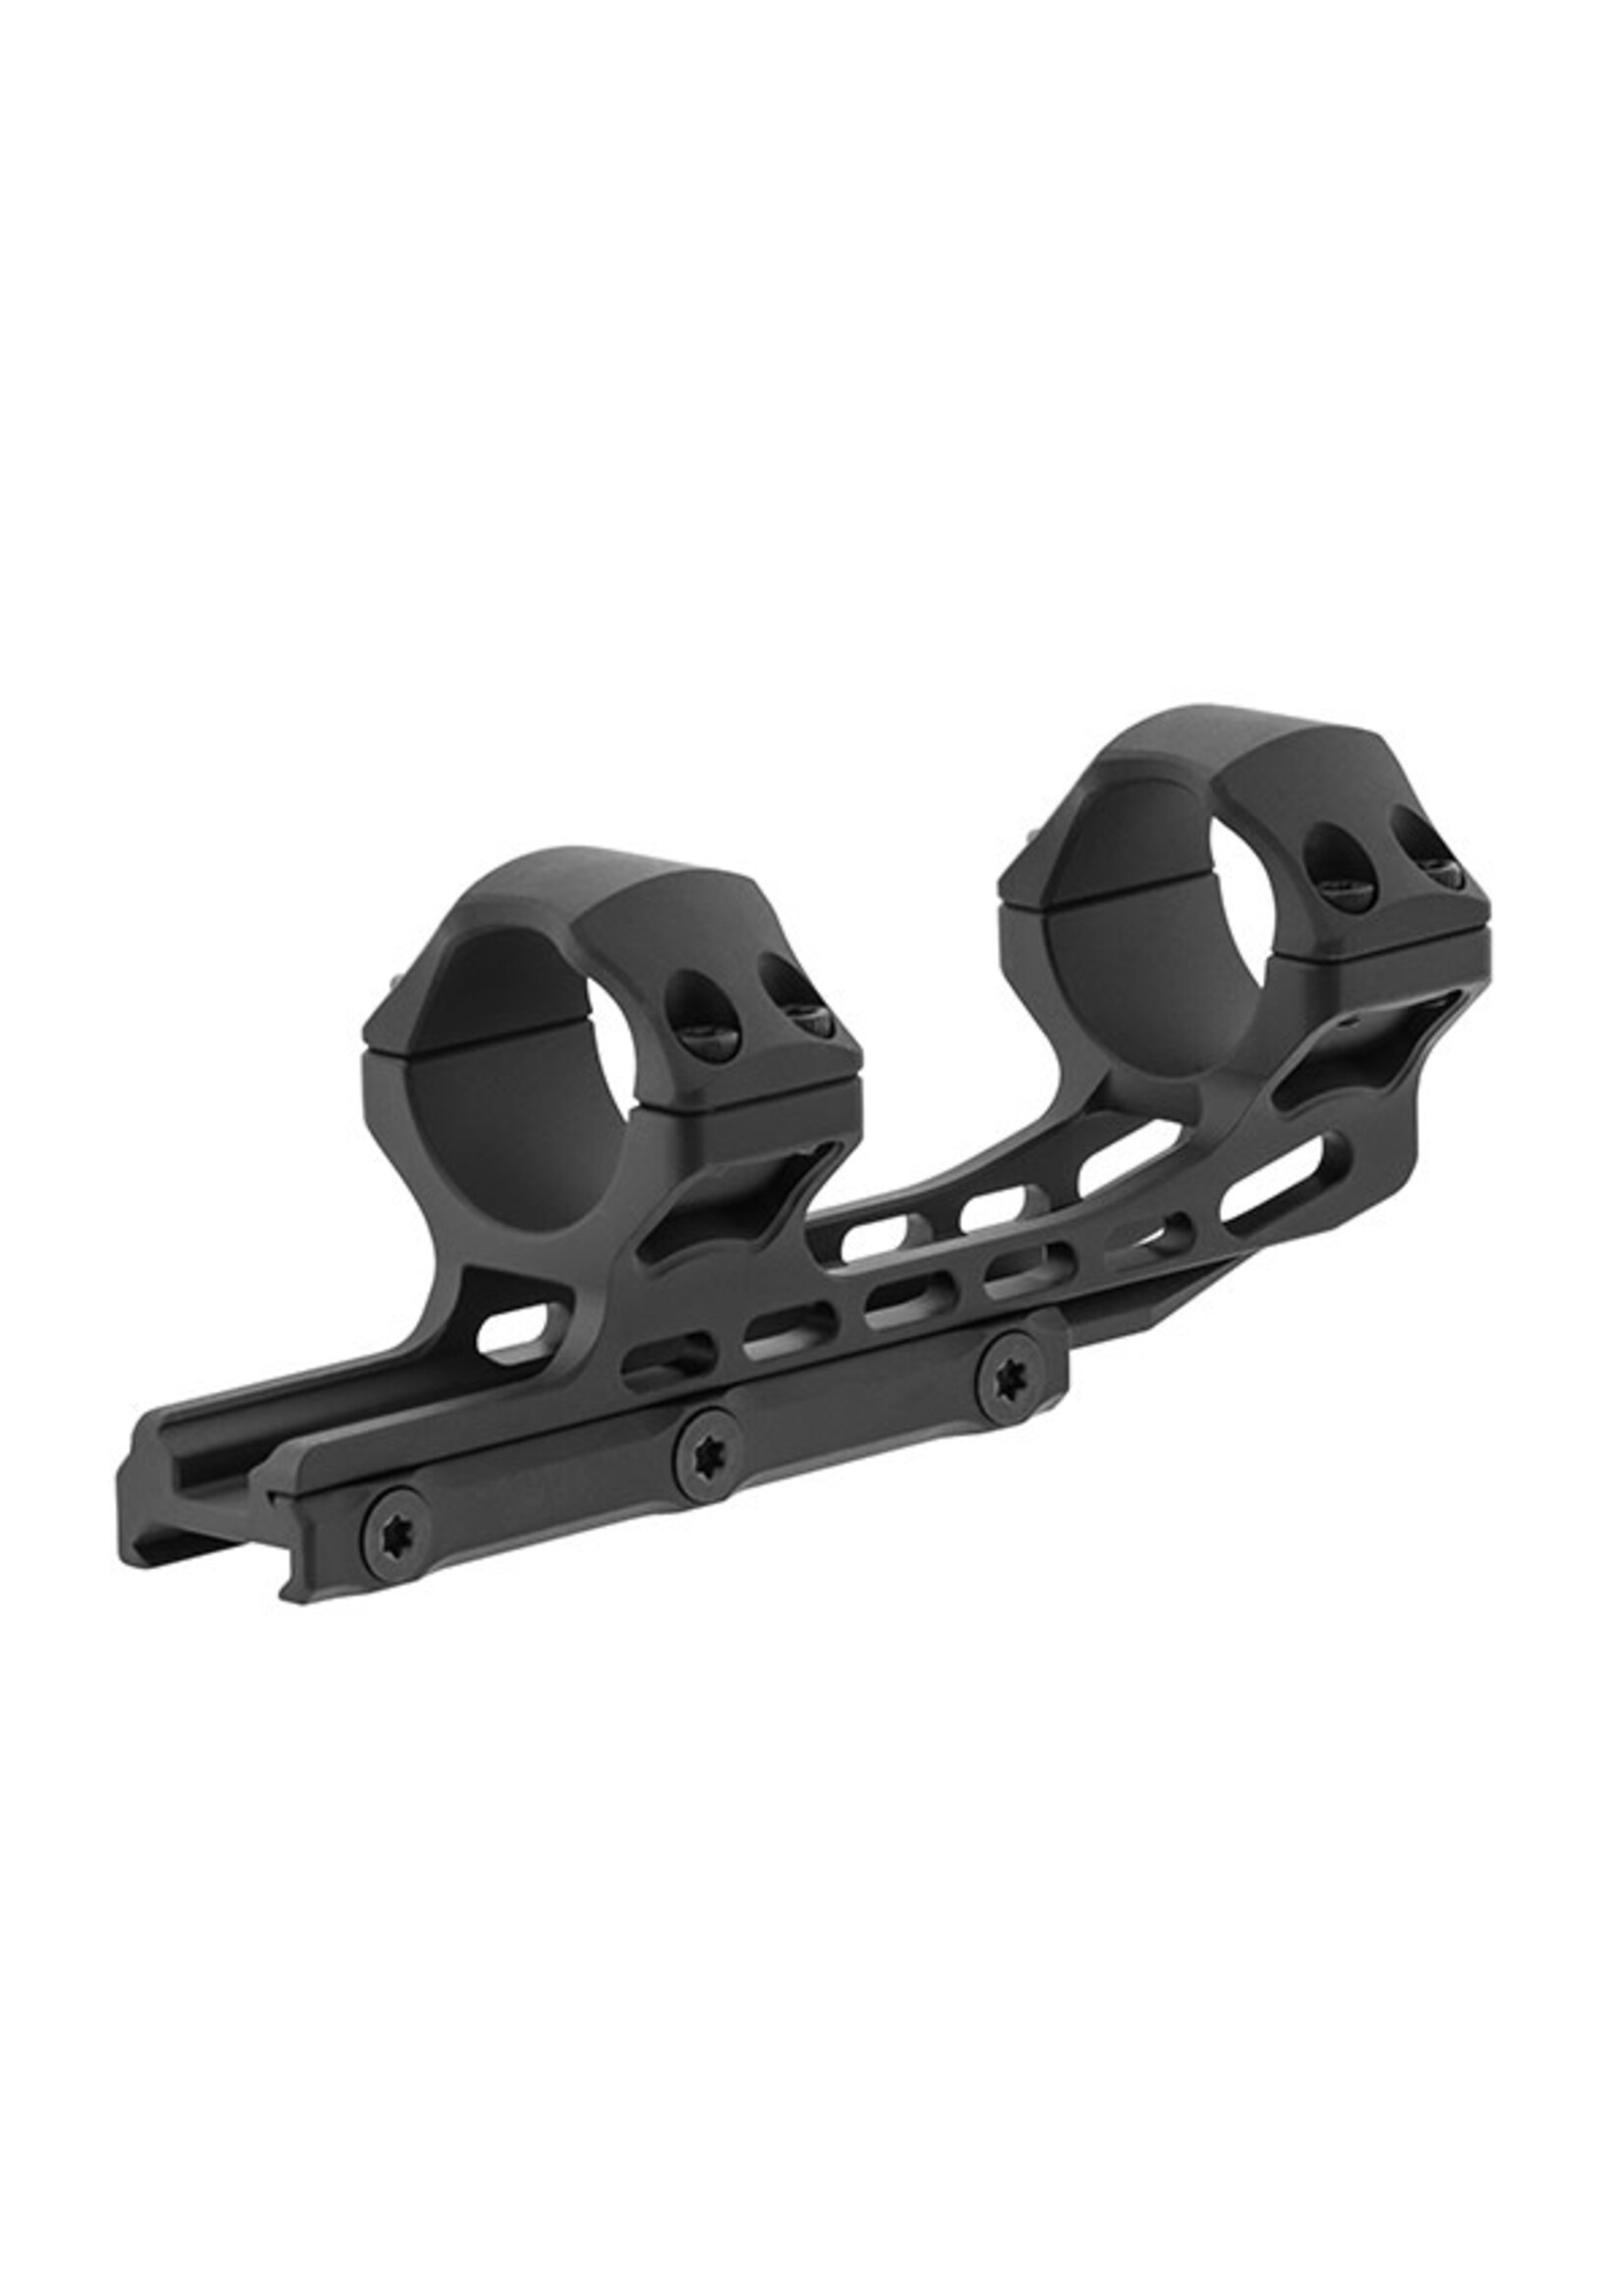 UTG ACCU-SYNC 30MM HIGH PROFILE 50MM OFFSET PICATINNY SCOPE RINGS